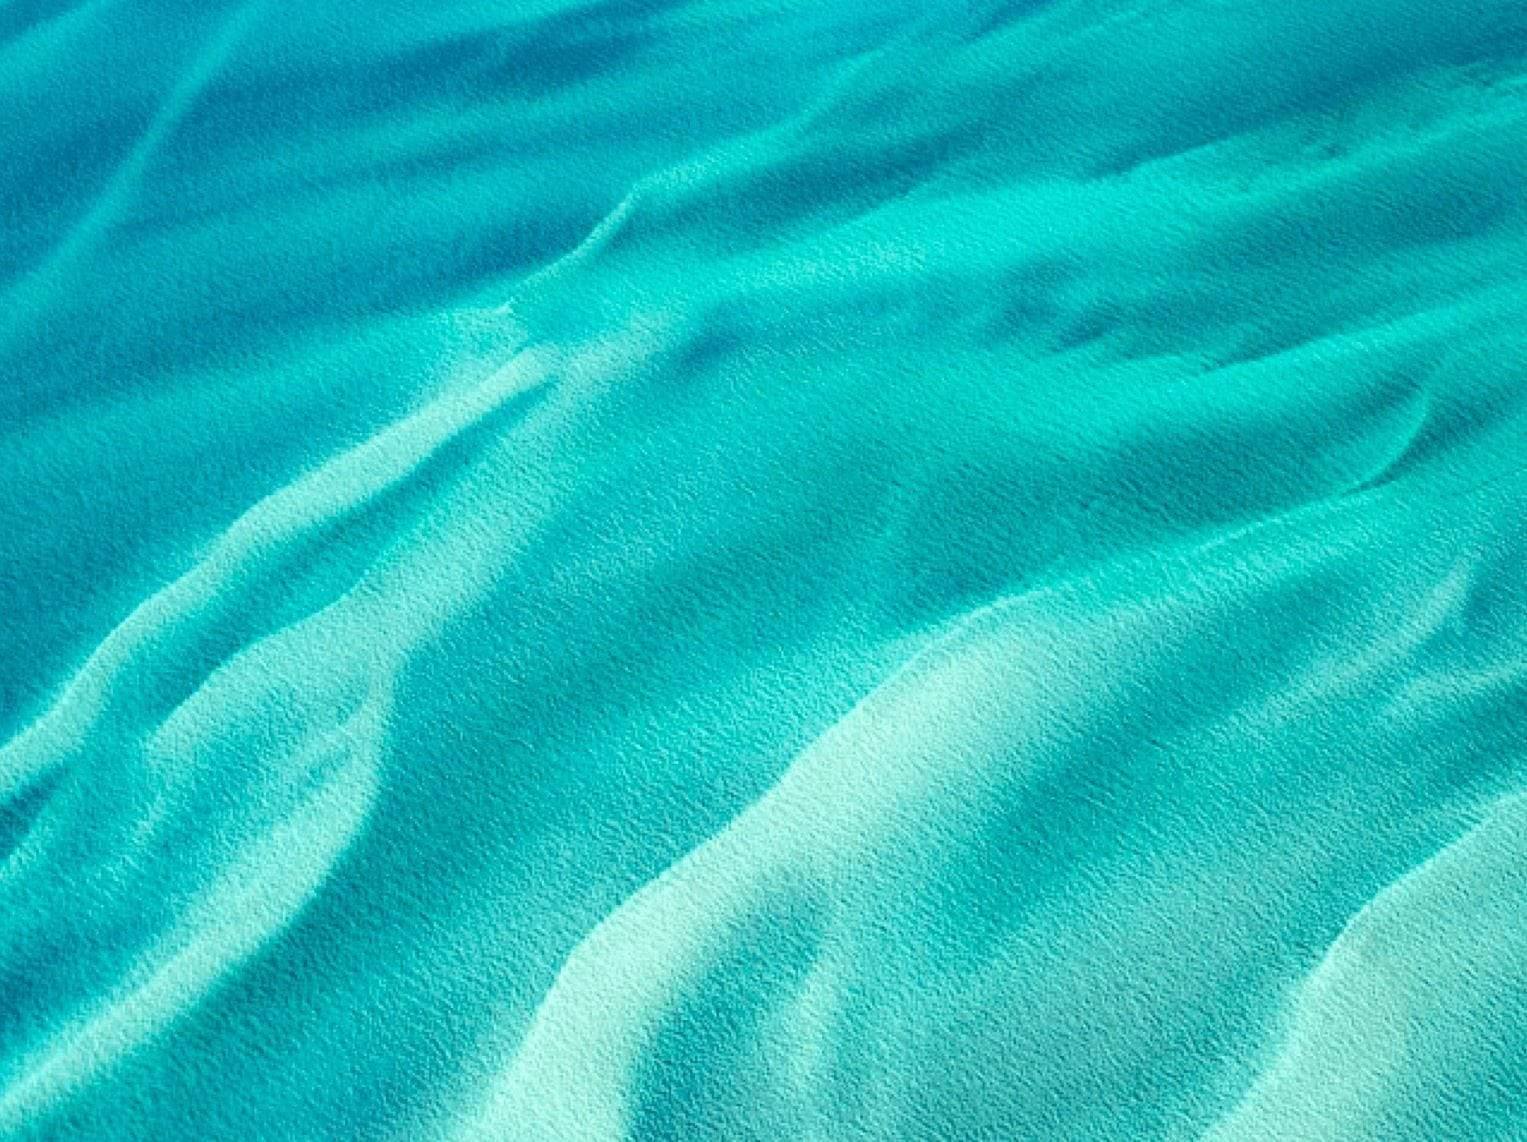 Water waves in the ice-blue ocean, Turquoise Waters